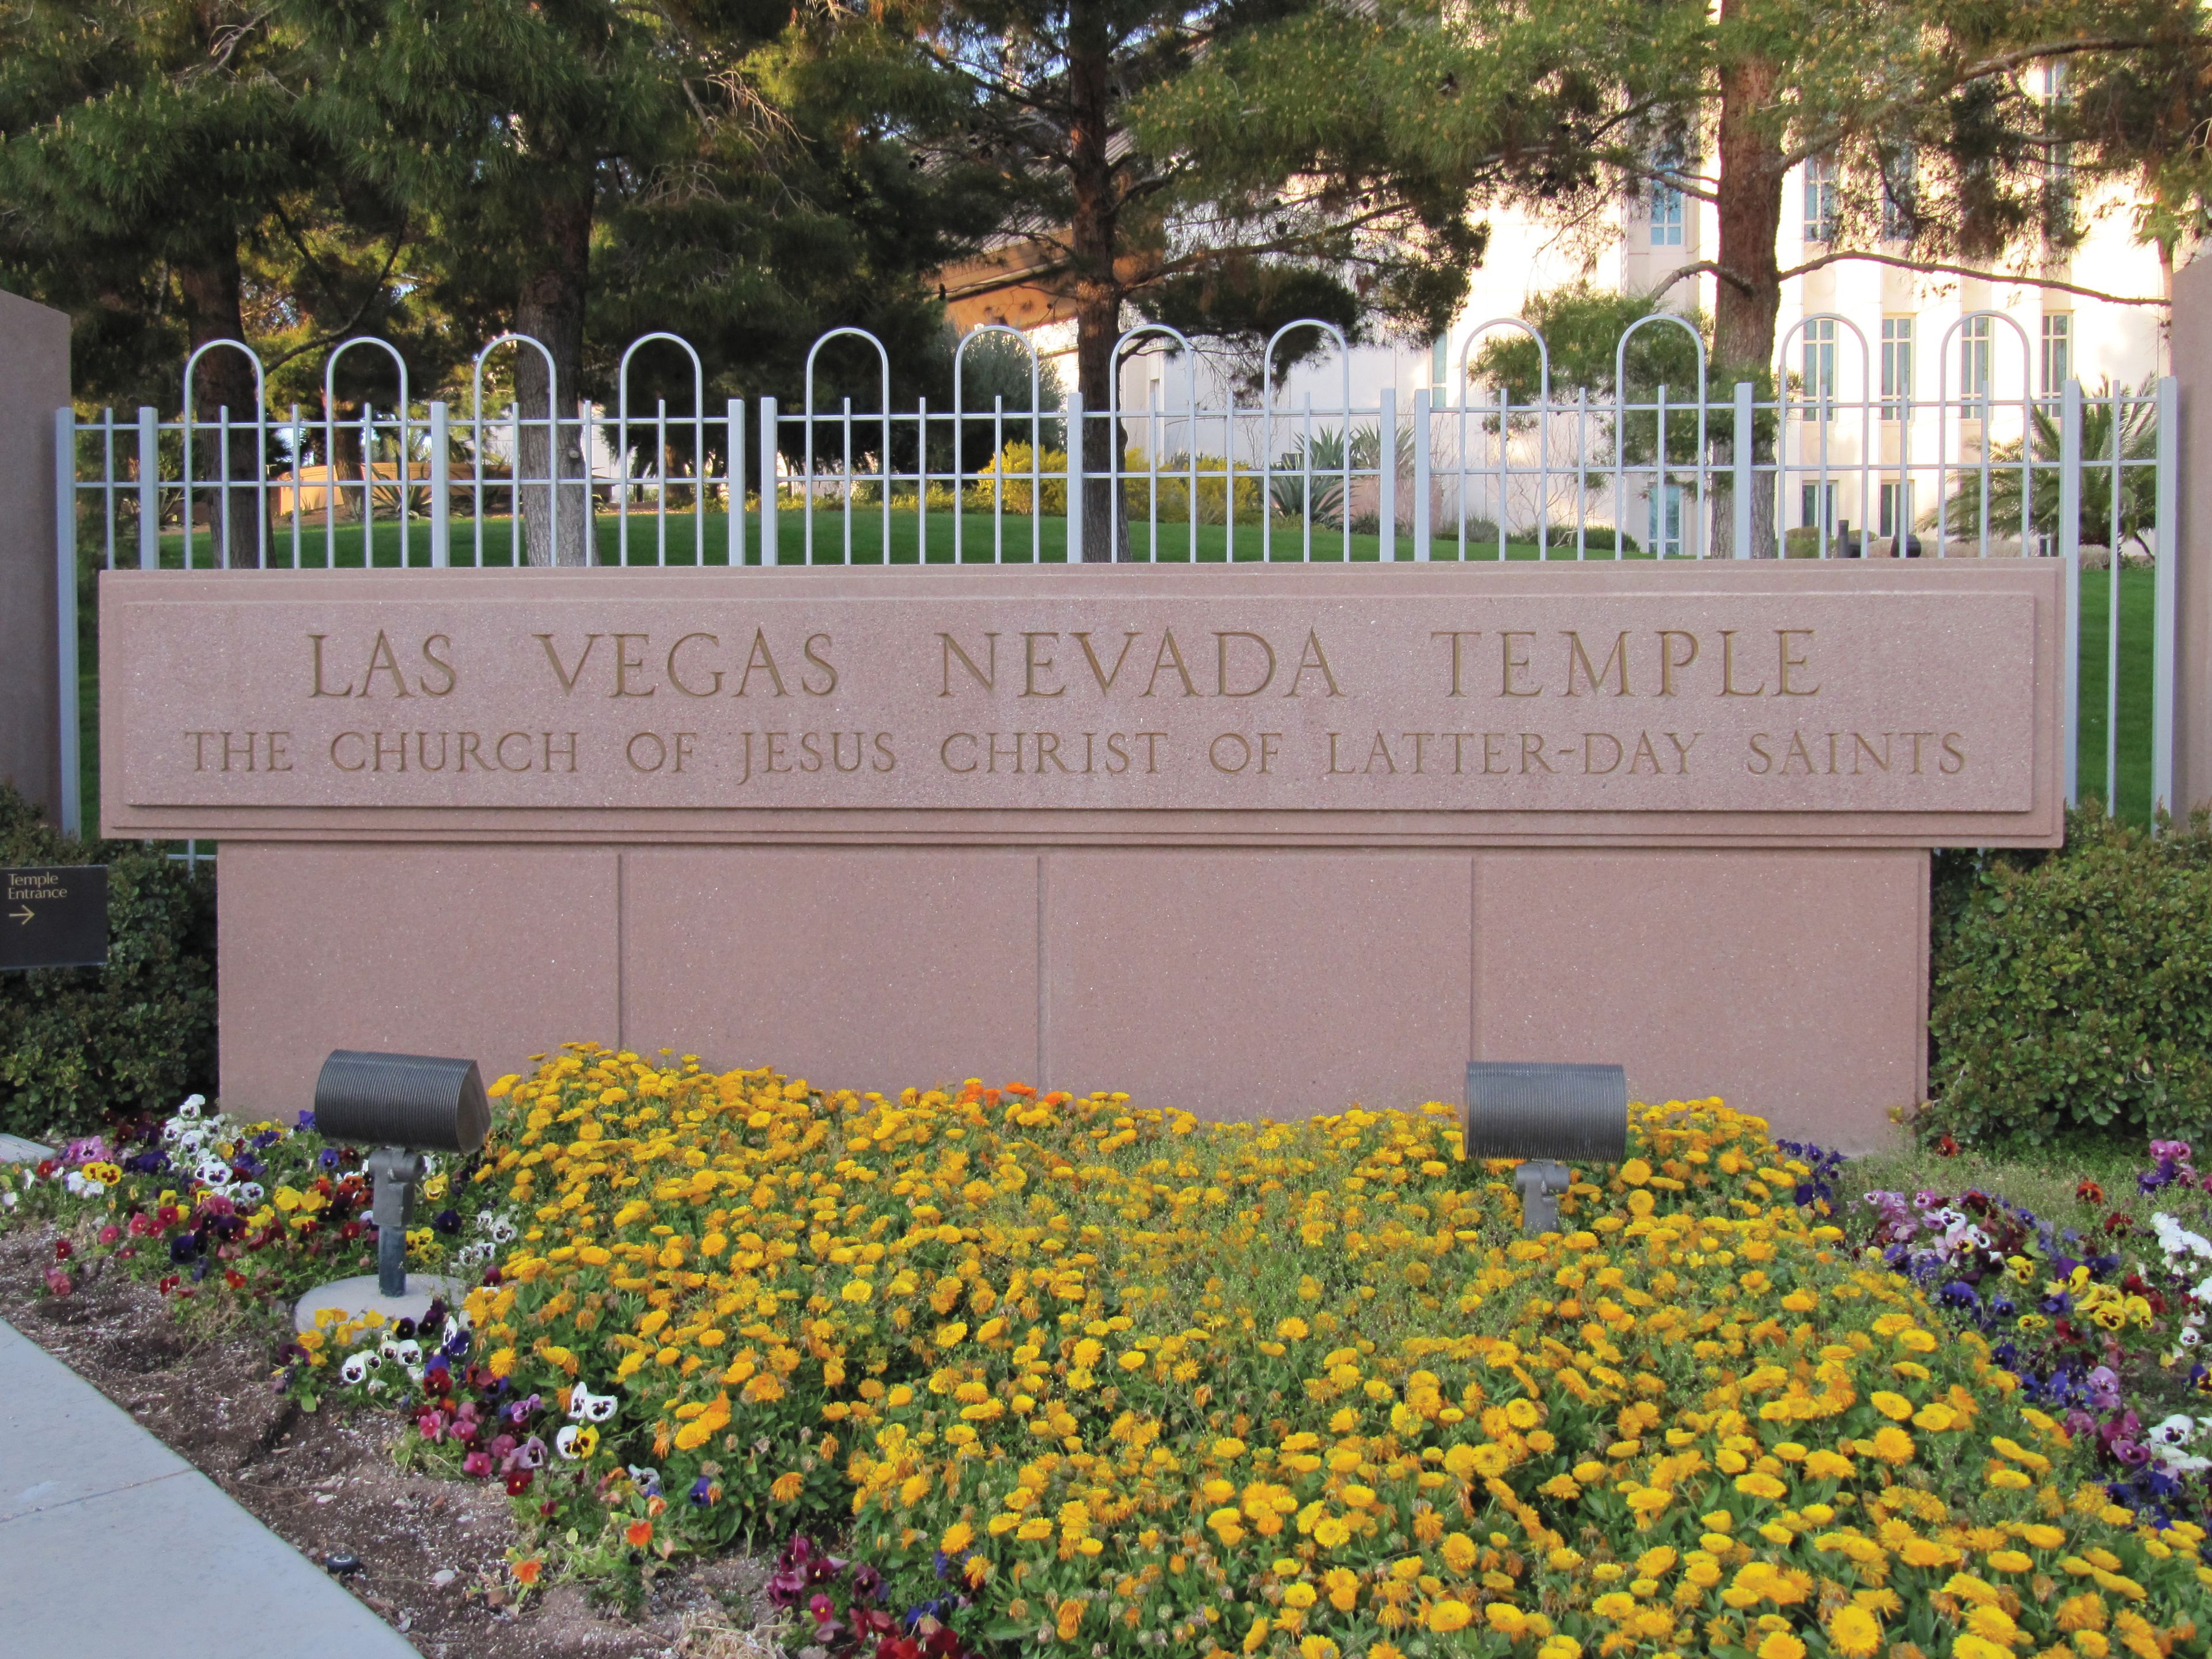 The Las Vegas Nevada Temple name sign, including scenery.